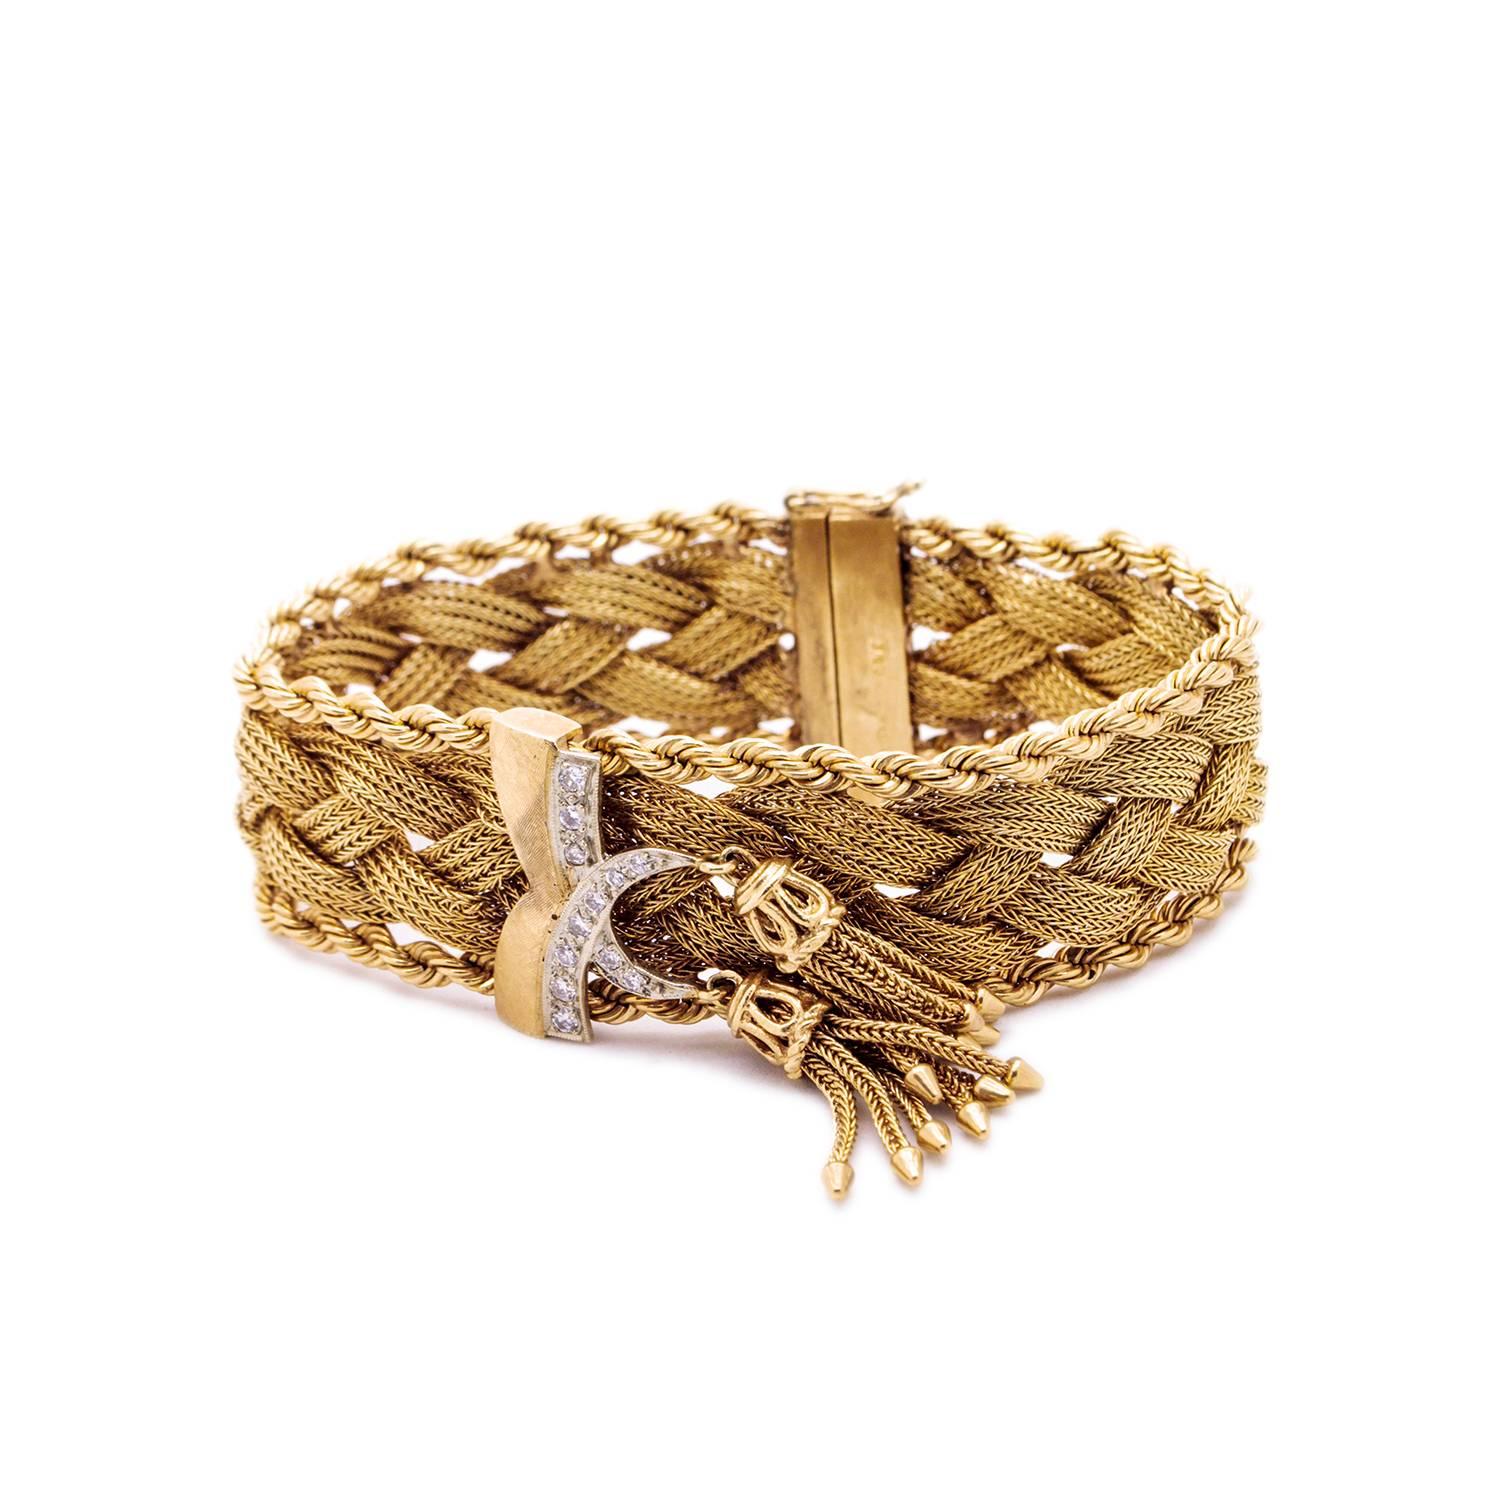 Vintage Gold and Diamond Bracelet,  featuring 12 Early Brilliant cut Diamonds and hanging tassels

14ct yellow gold 12 stone Diamond bracelet. 20mm wide 3 row mesh braided gold strands with rope embellishment on each side with center satin finish, V